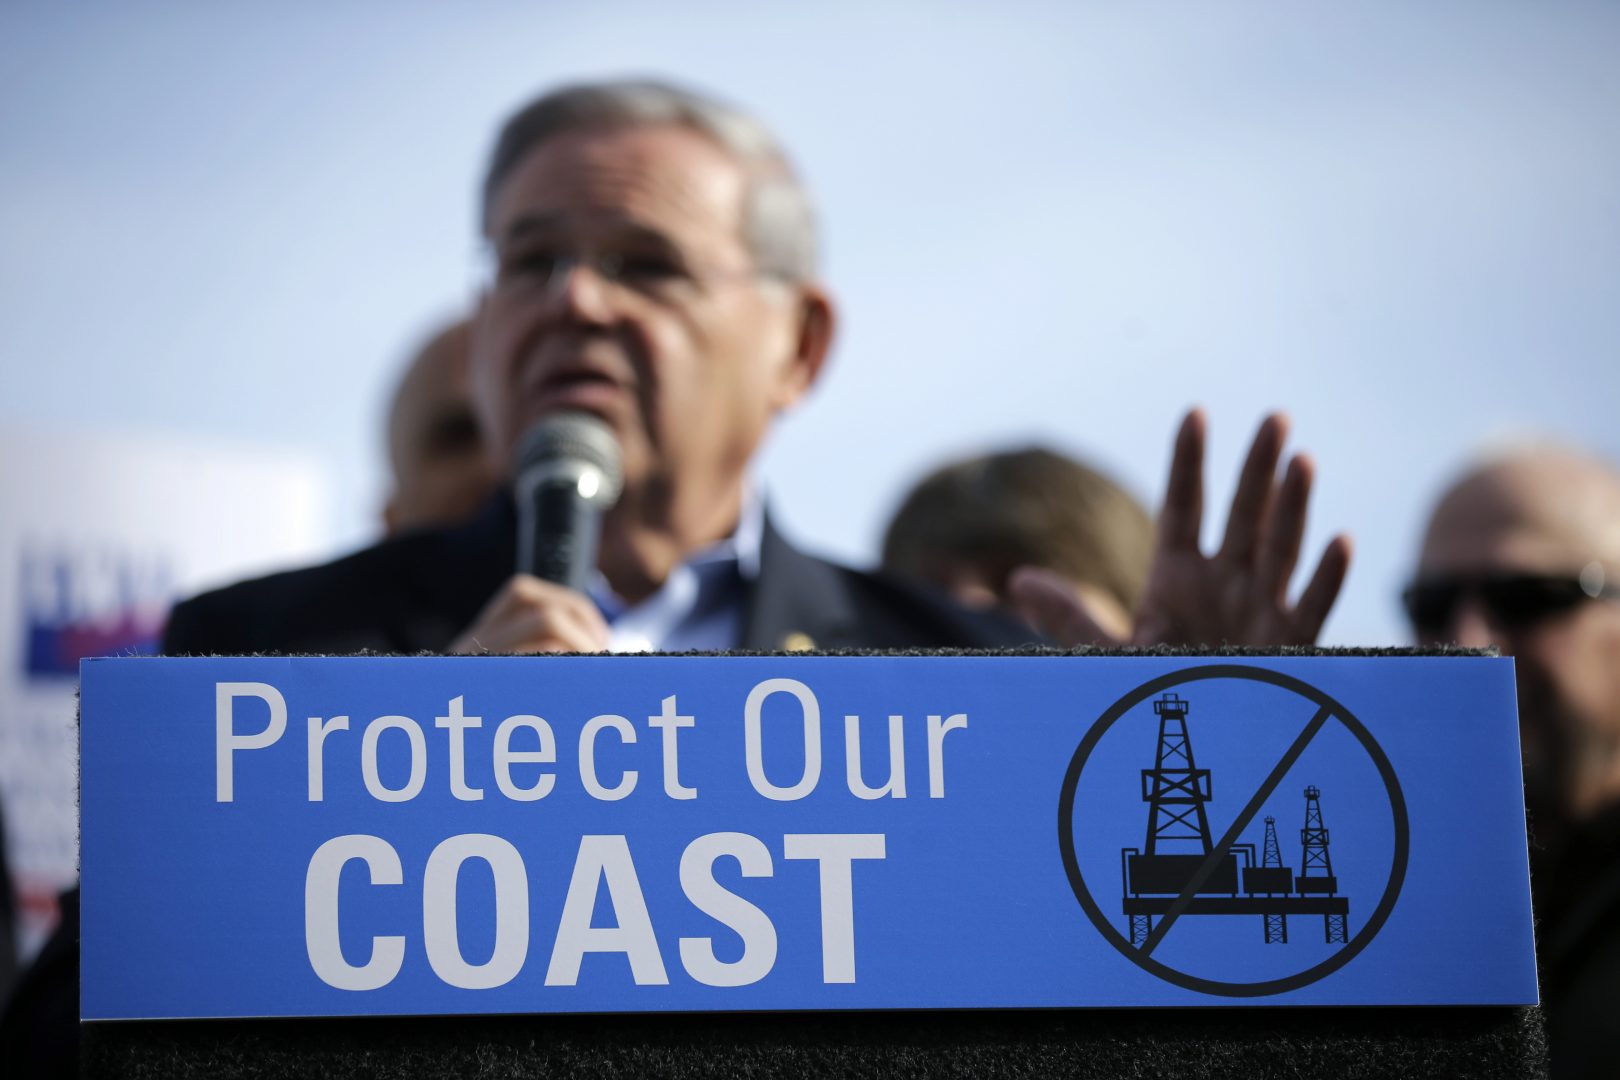 FILE - In this Jan. 31, 2016 file photo, Democratic U.S. Sen. Bob Menendez addresses a large rally in Asbury Park, N.J., opposing federal plans that would allow oil and gas drilling in the Atlantic Ocean. The Obama administration has moved to restrict access to offshore oil drilling leases in the Atlantic, as well as off Alaska. But President-elect Trump has said that he intends to open up offshore drilling, and environmentalists and coastal businesses say it could be the first major fault line that divides them from the new president. 